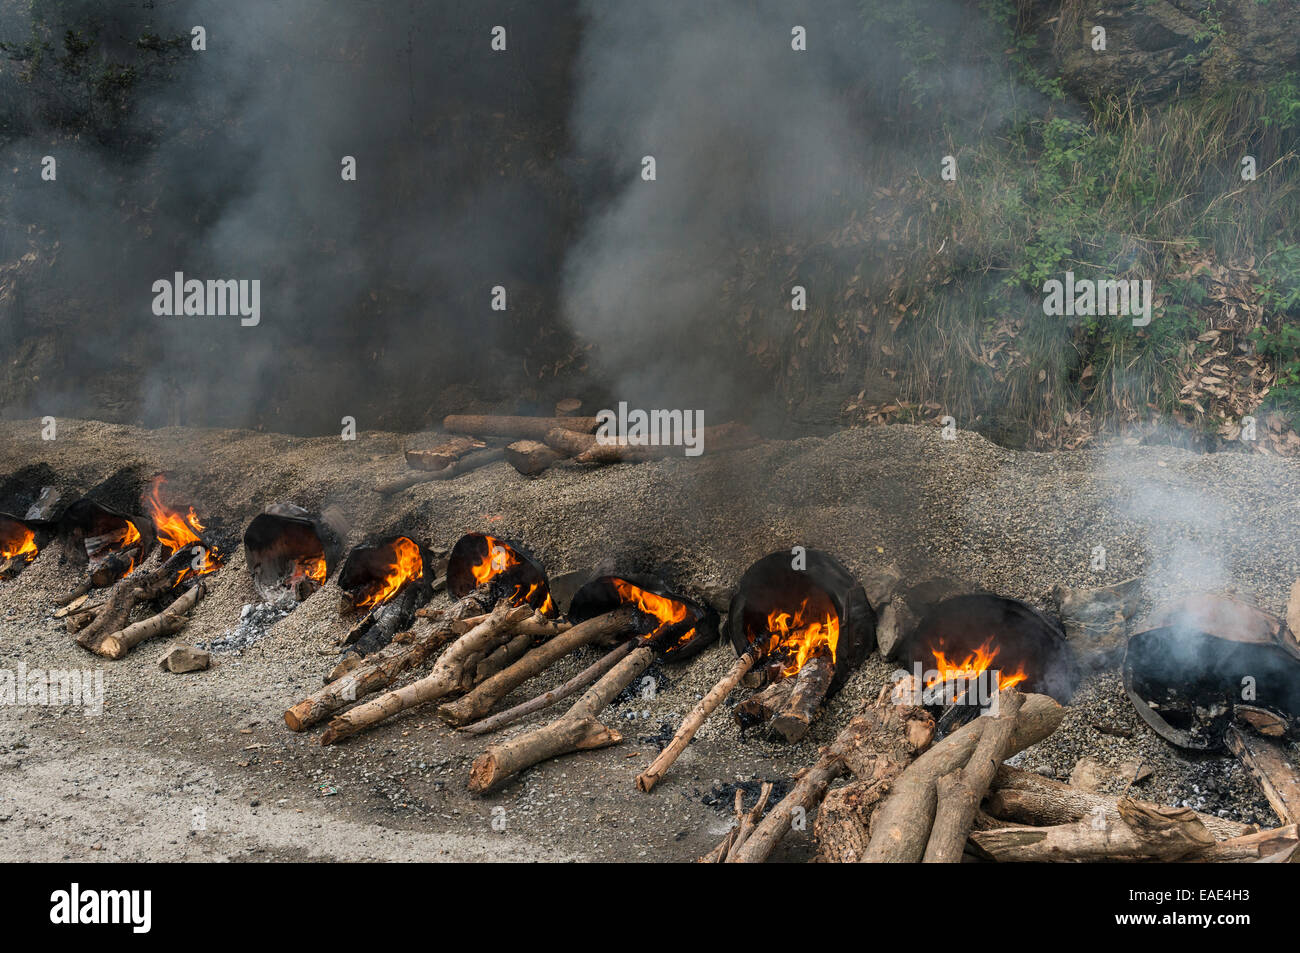 Gravel and hot tar being mixed on open fires at a road construction site, Shimla, Himachal Pradesh, India Stock Photo